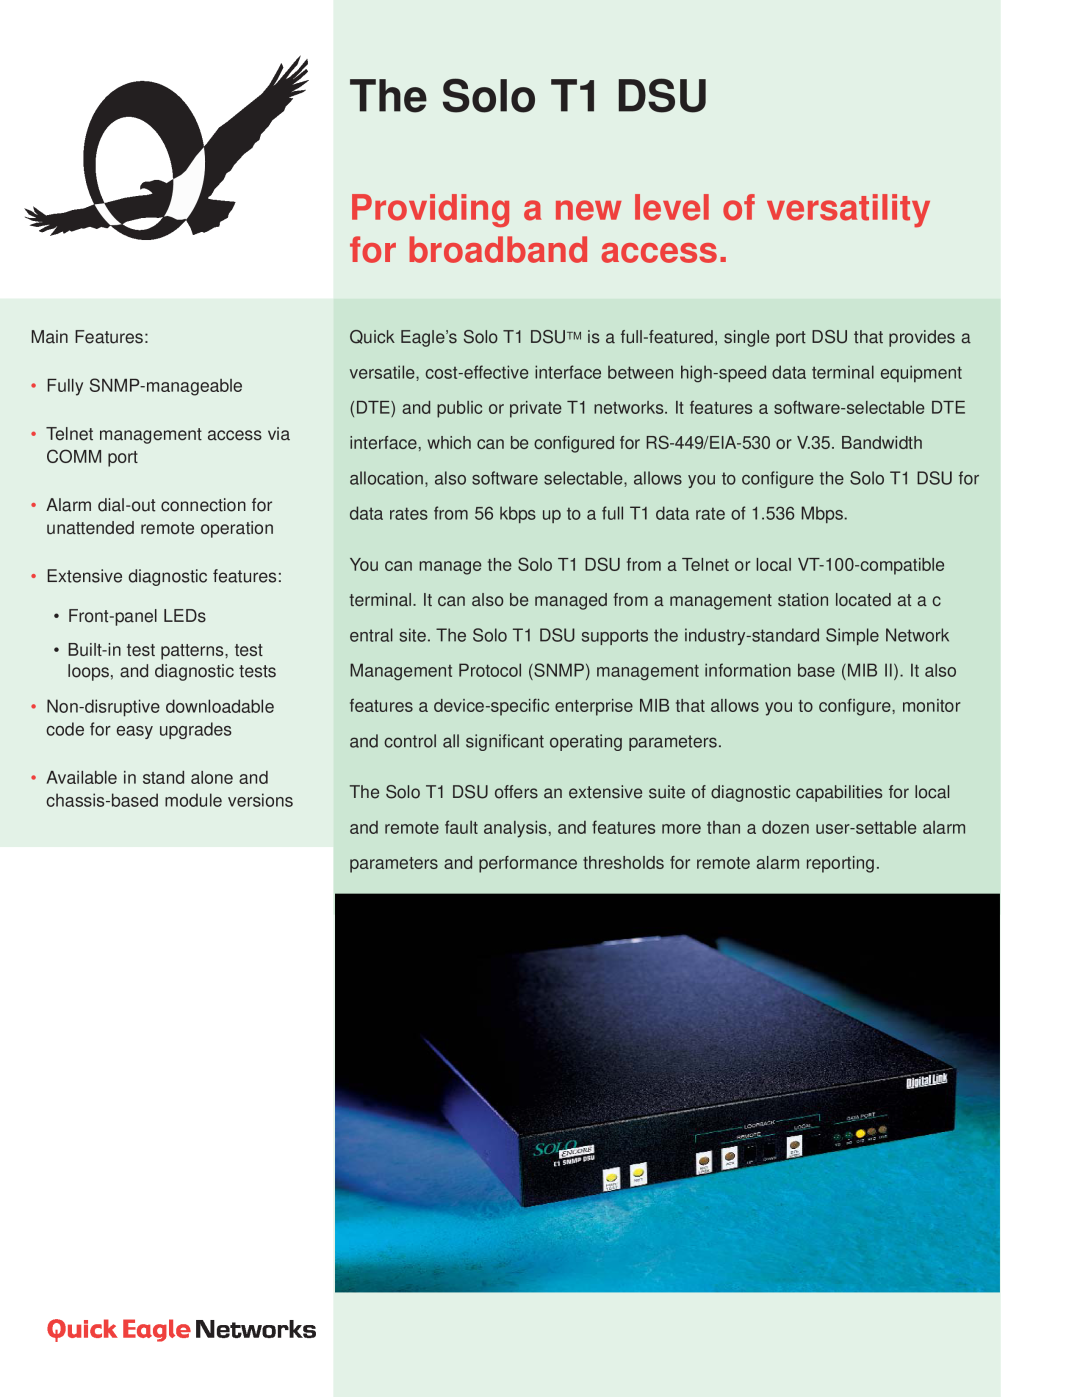 Quick Eagle Networks manual The Solo T1 DSU, Providing a new level of versatility for broadband access 